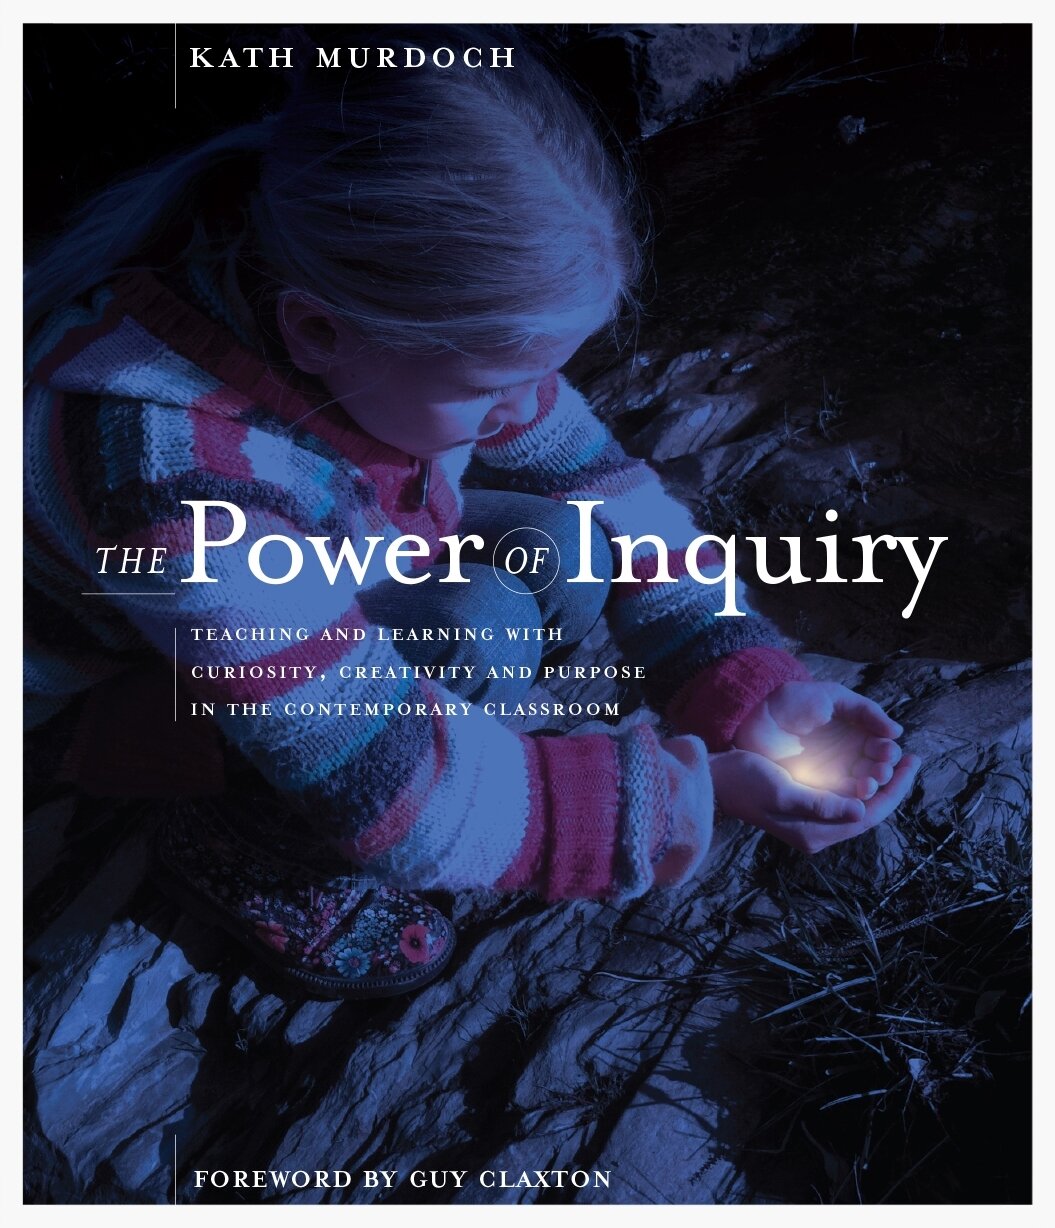 The Power of Inquiry book